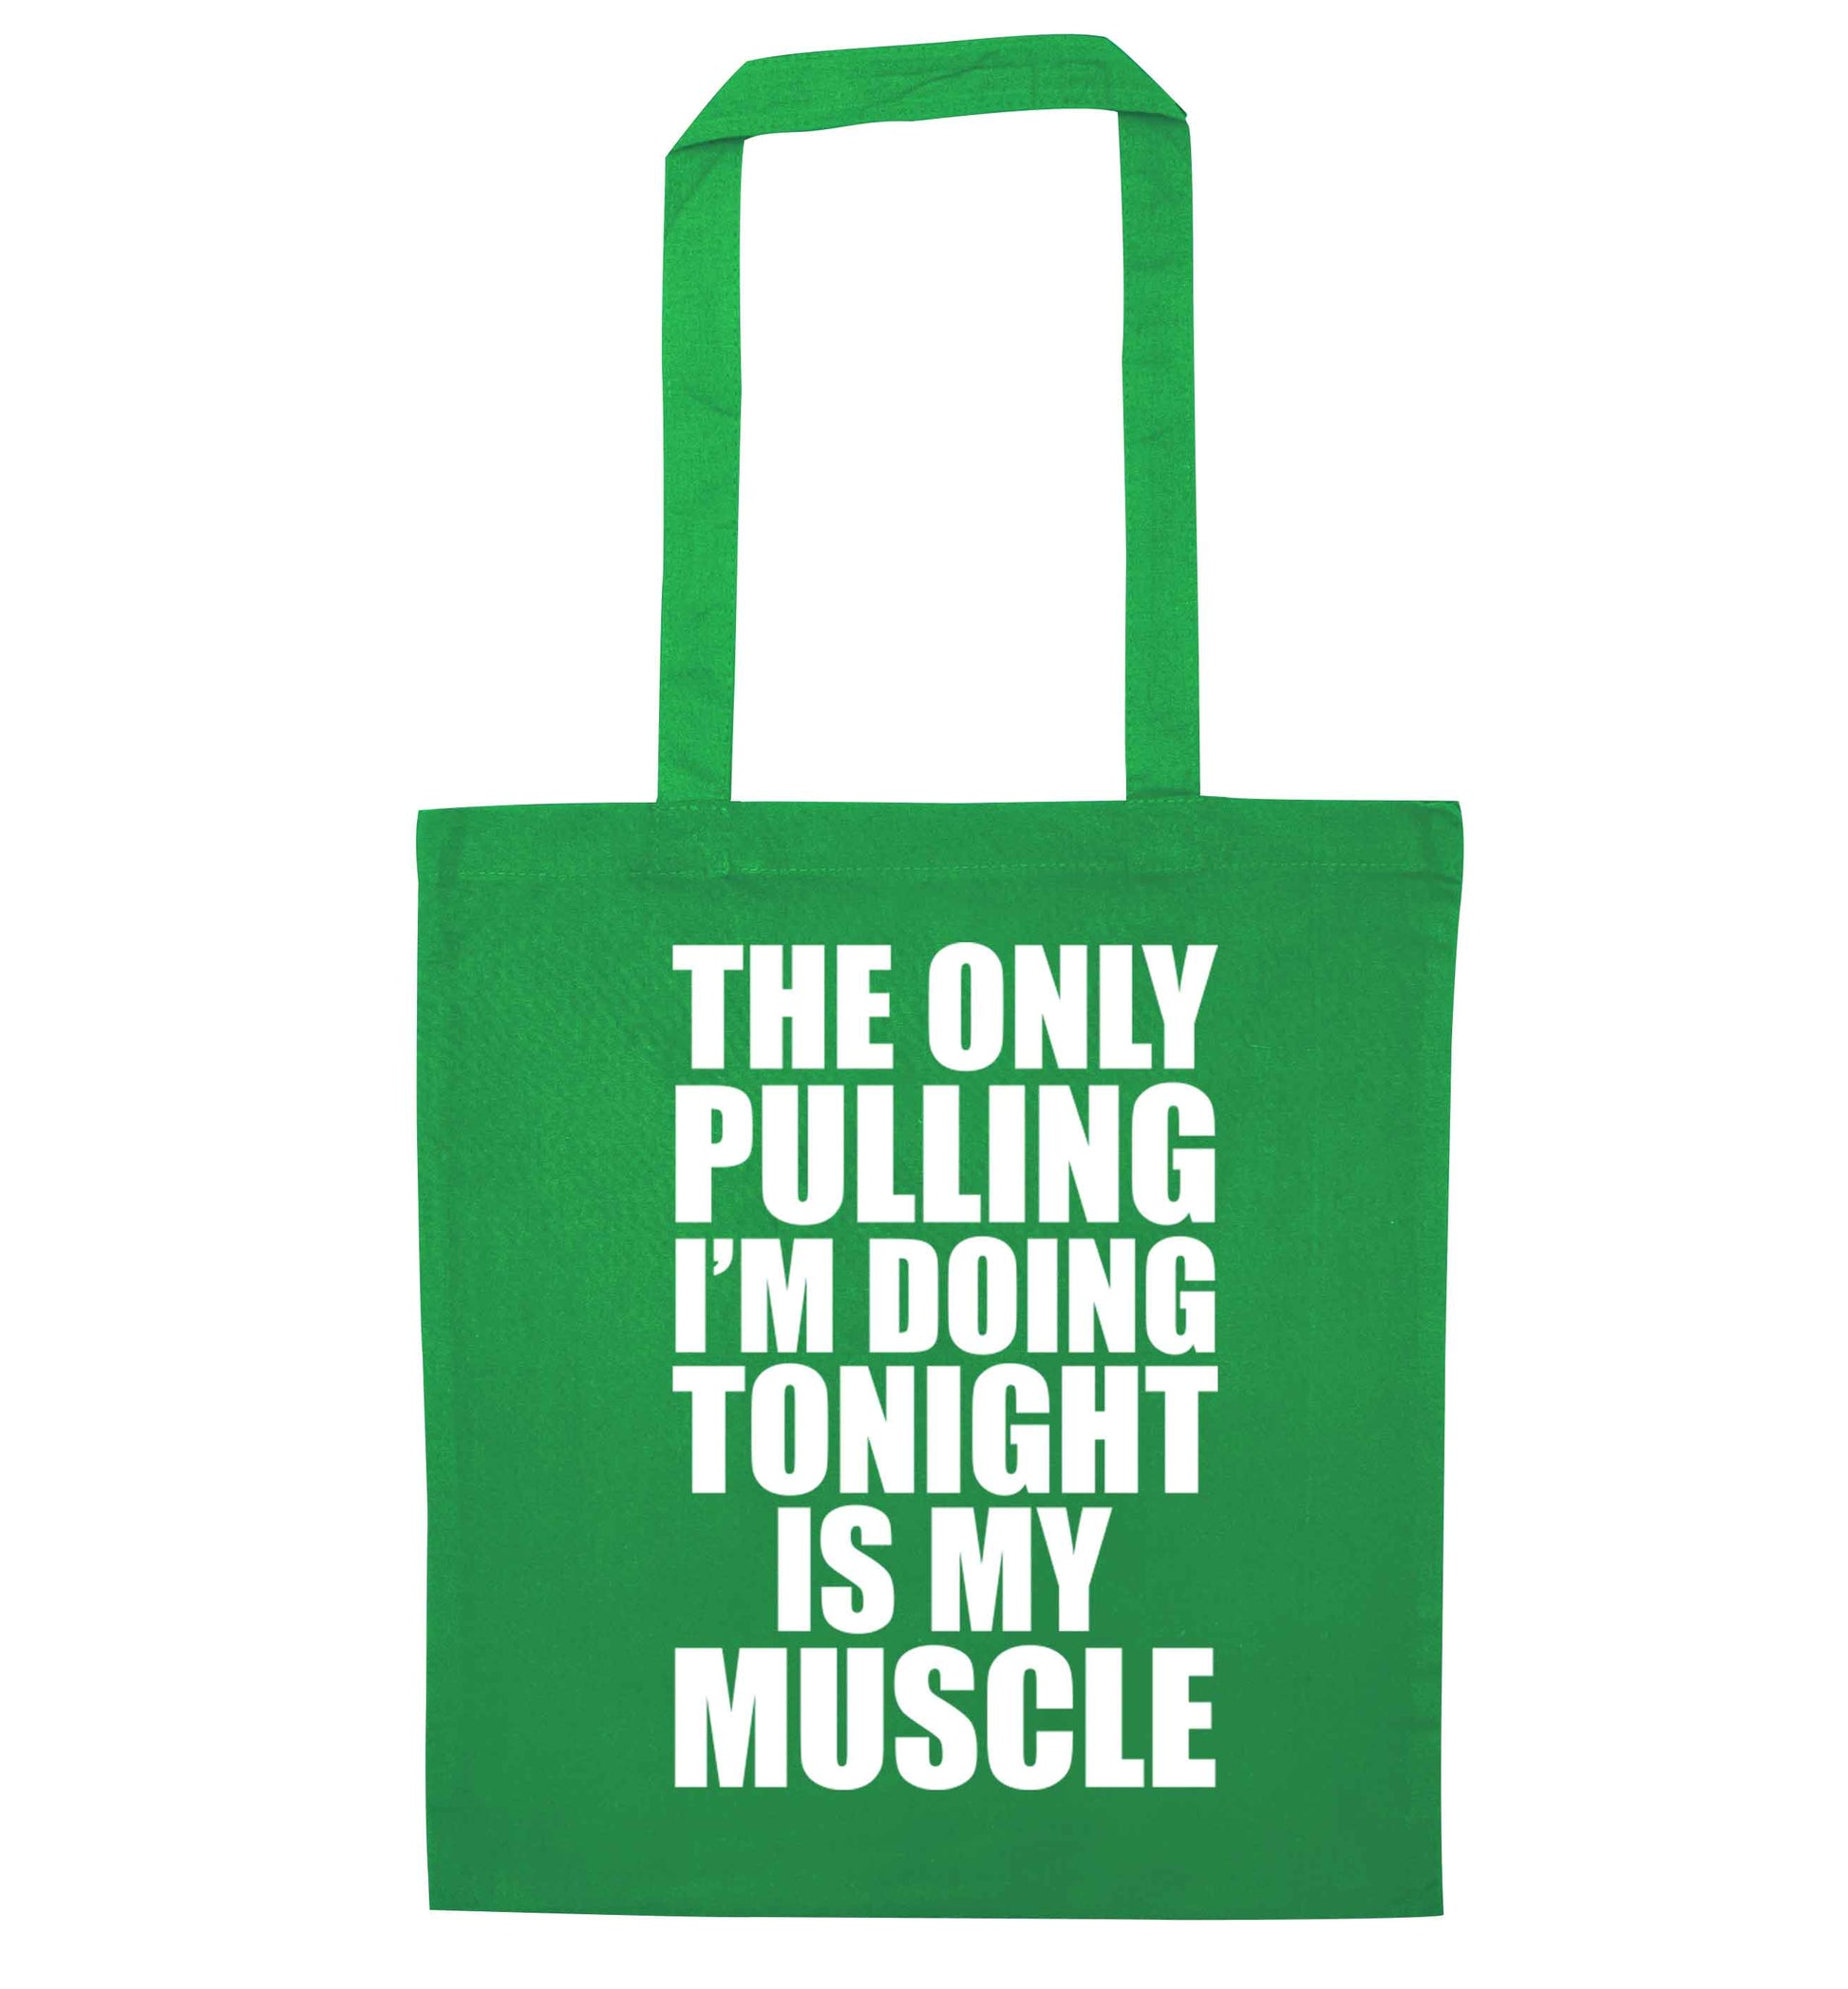 The only pulling I'm doing tonight is my muscle green tote bag